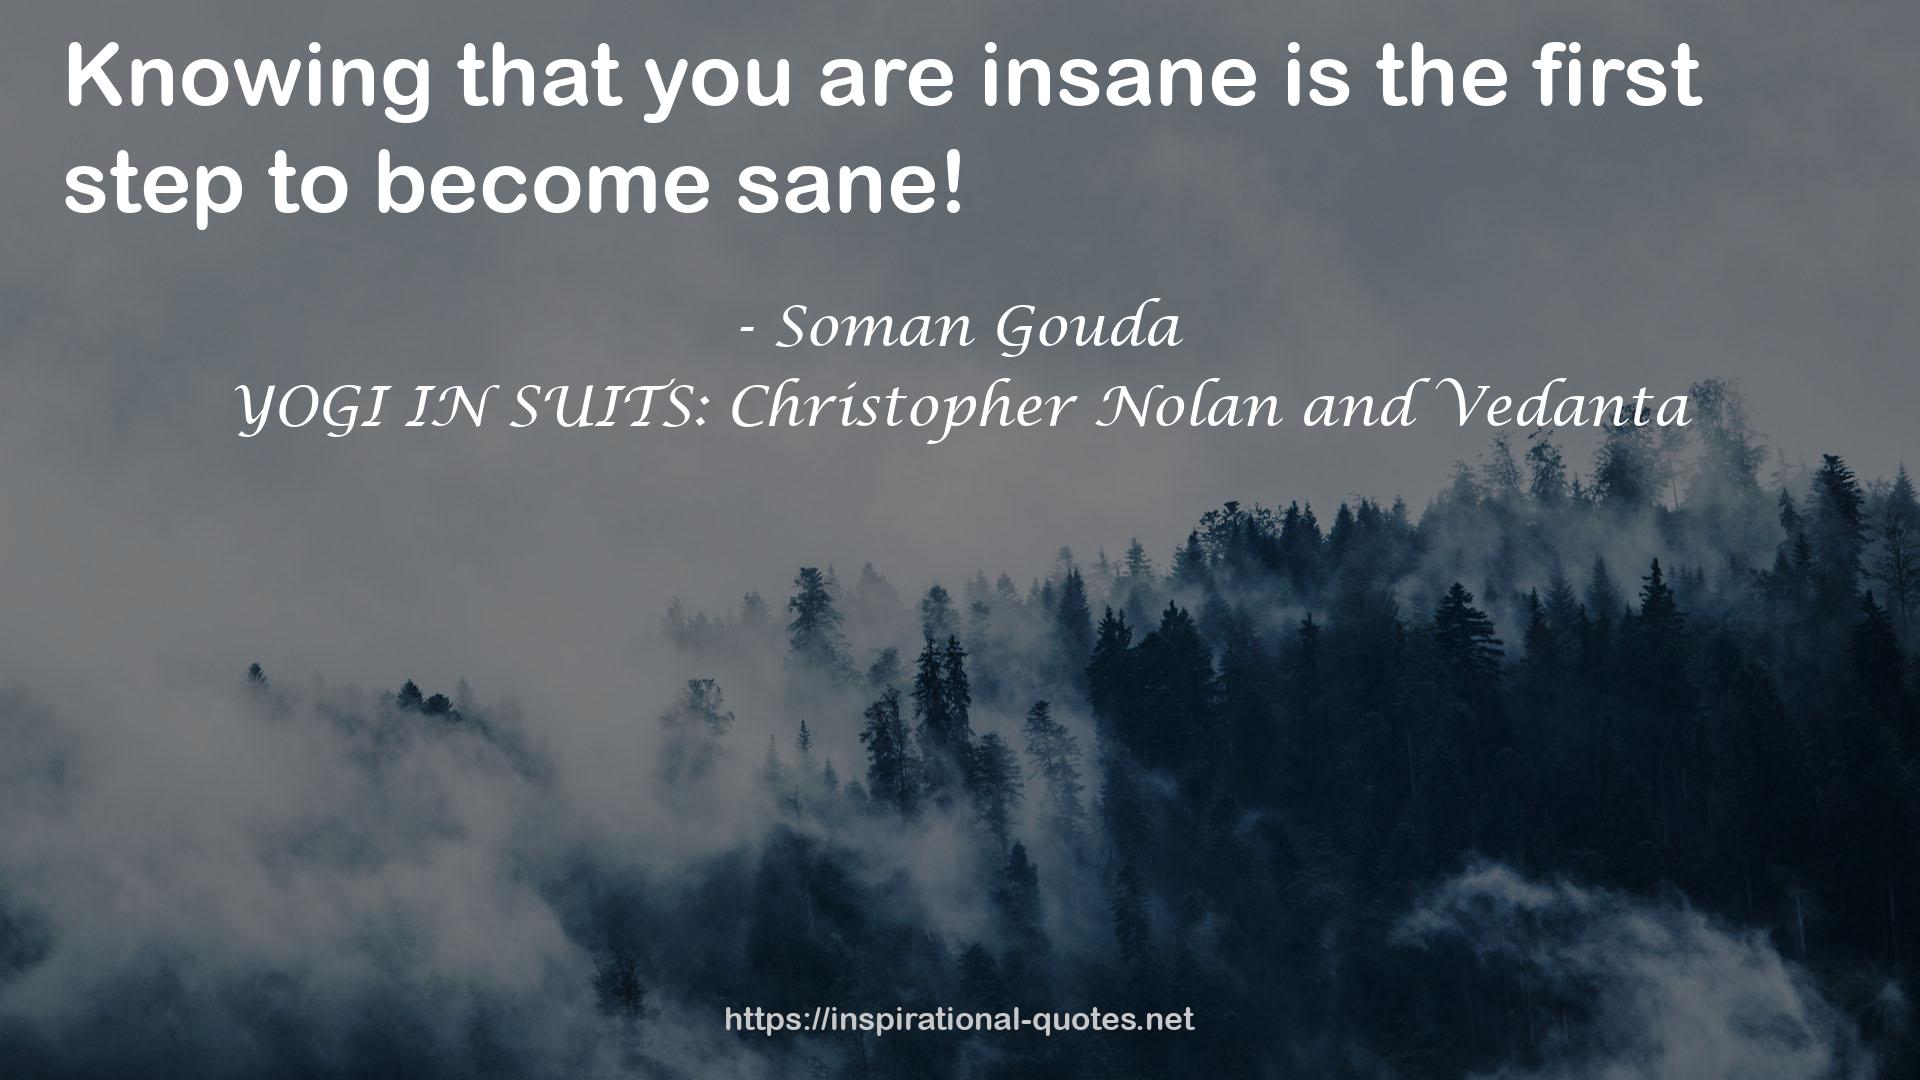 YOGI IN SUITS: Christopher Nolan and Vedanta QUOTES